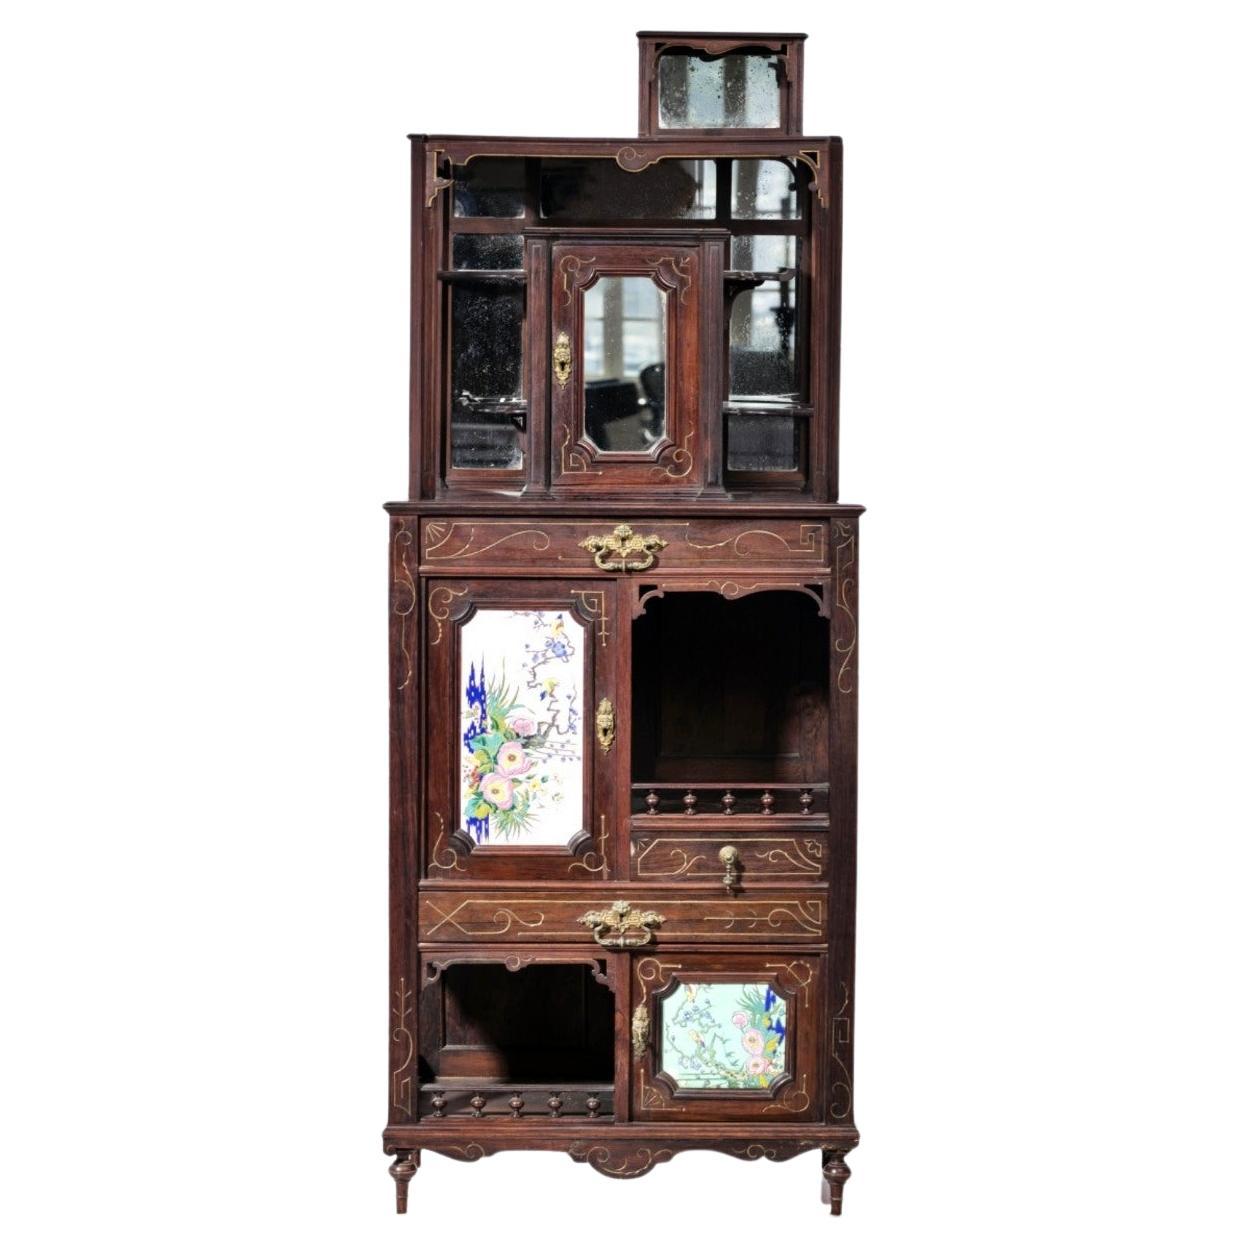 Art Nouveau Cabinet French from the 19th Century